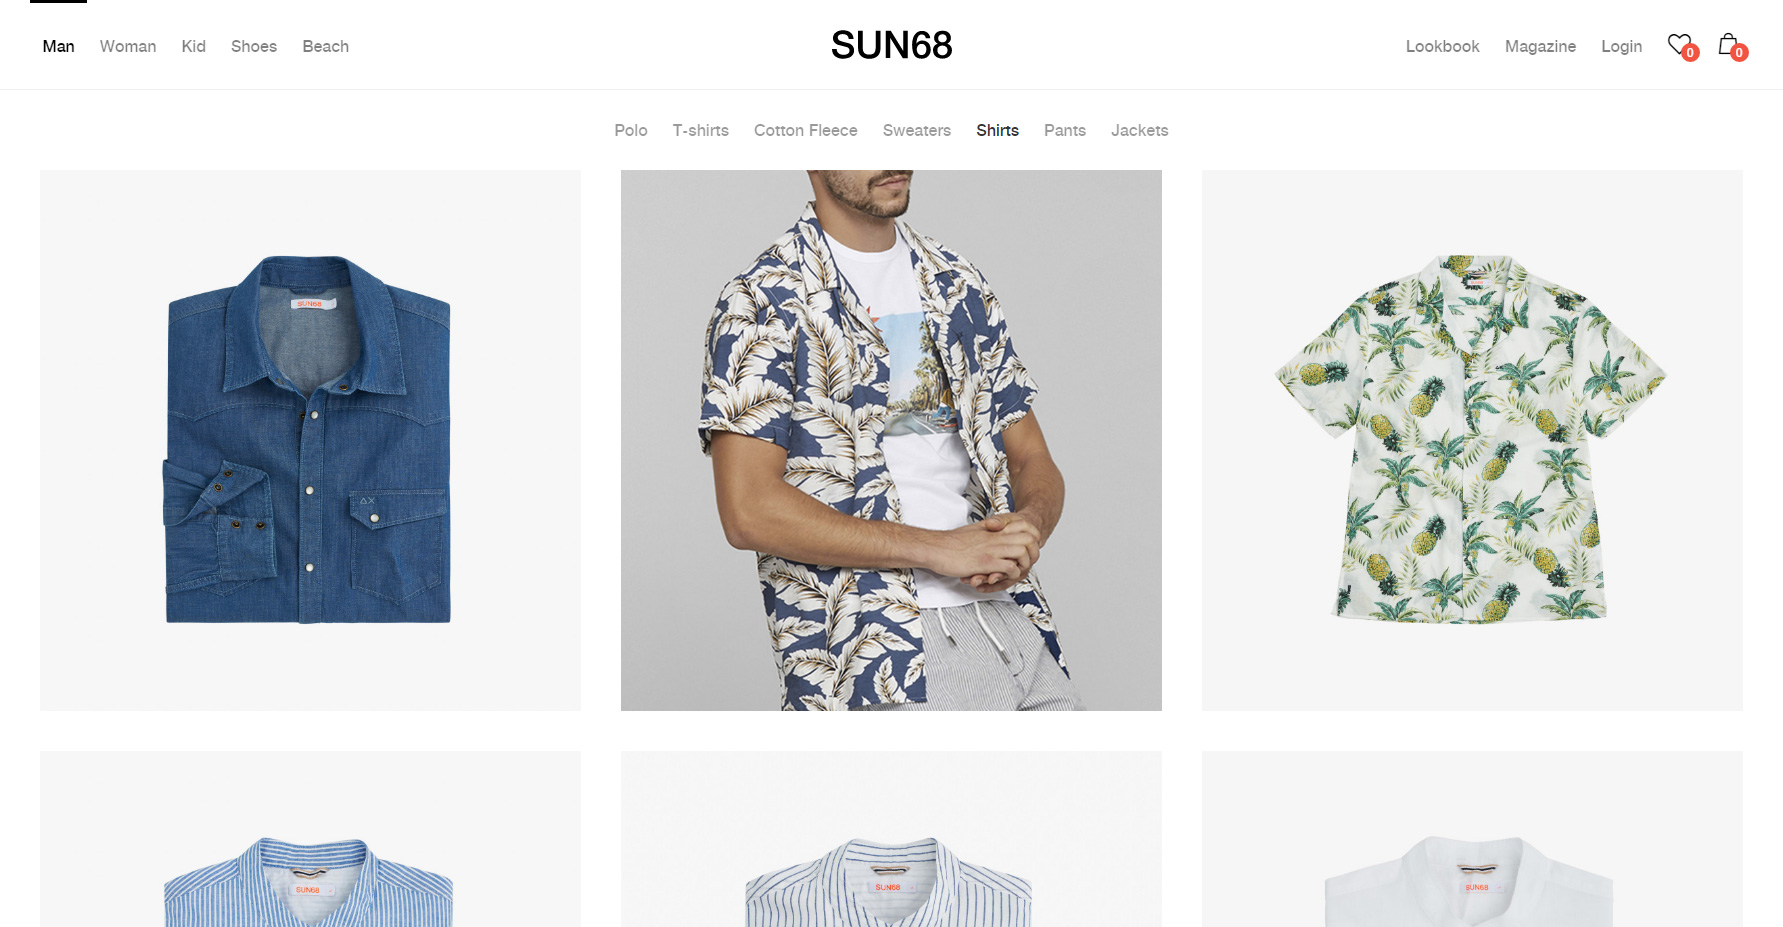 SUN68 - Website of the Day